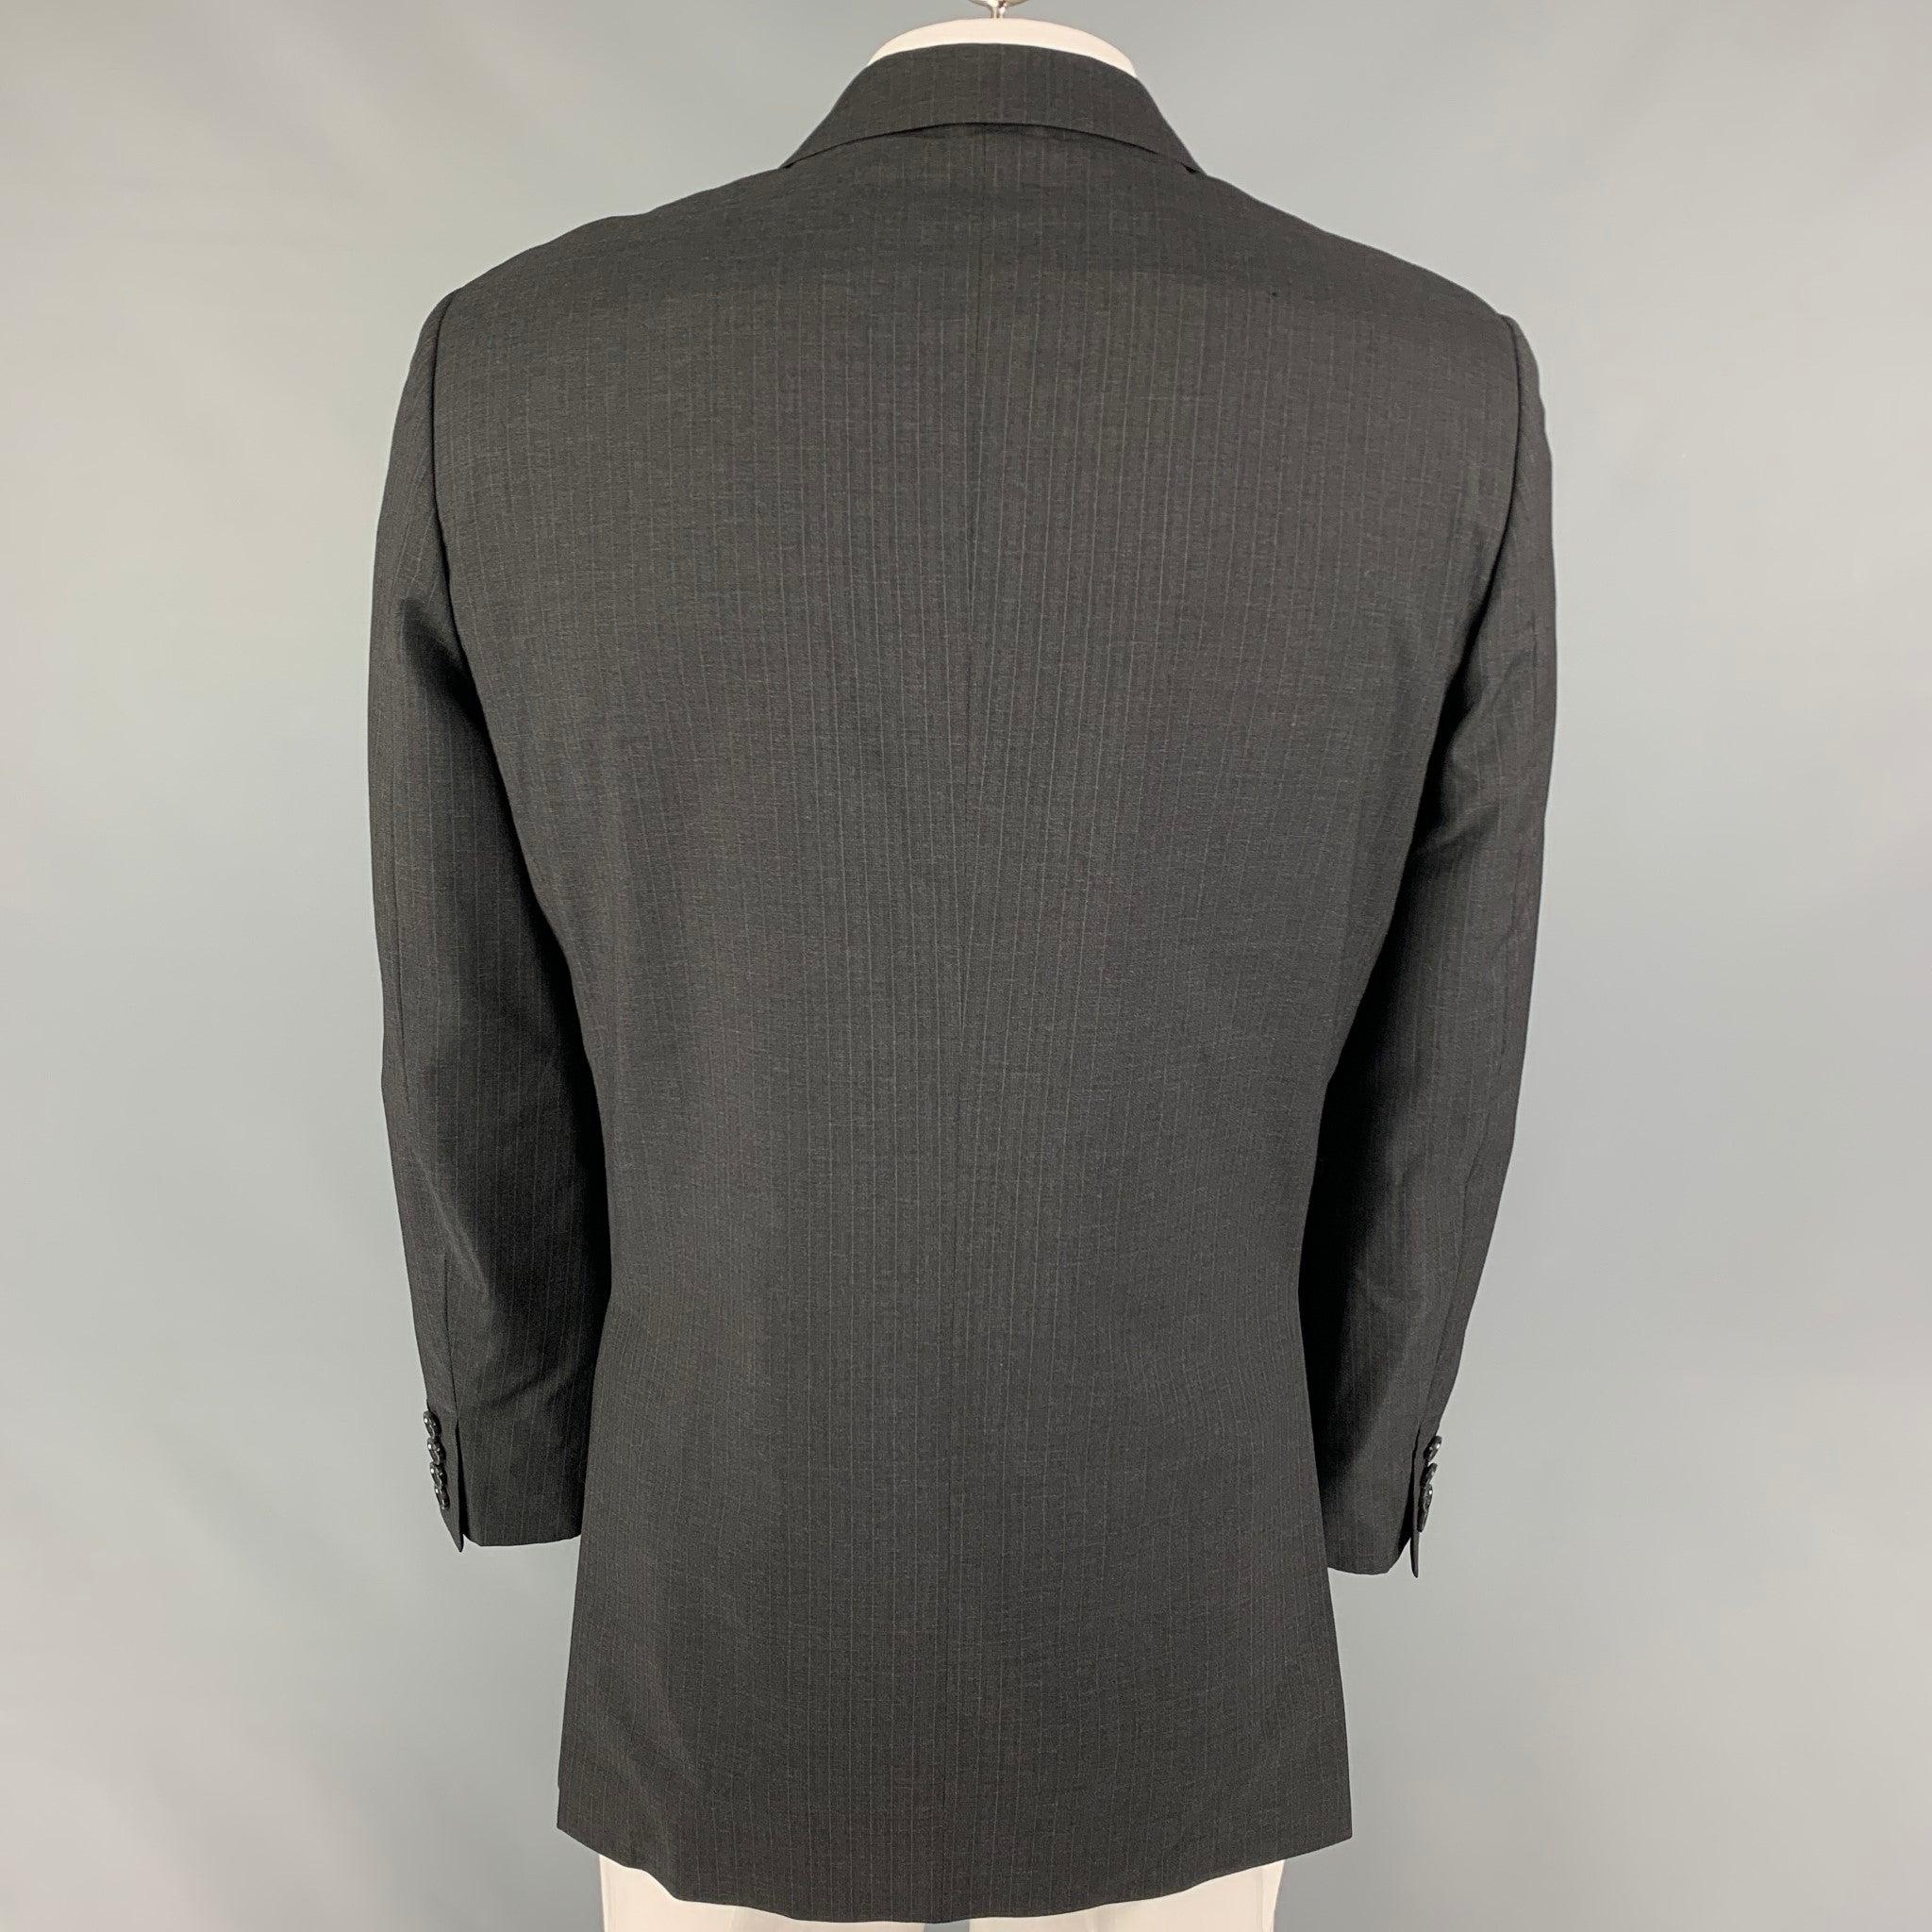 DOLCE & GABBANA Size 46 Charcoal Pinstripe Virgin Wool Sport Coat In Good Condition For Sale In San Francisco, CA